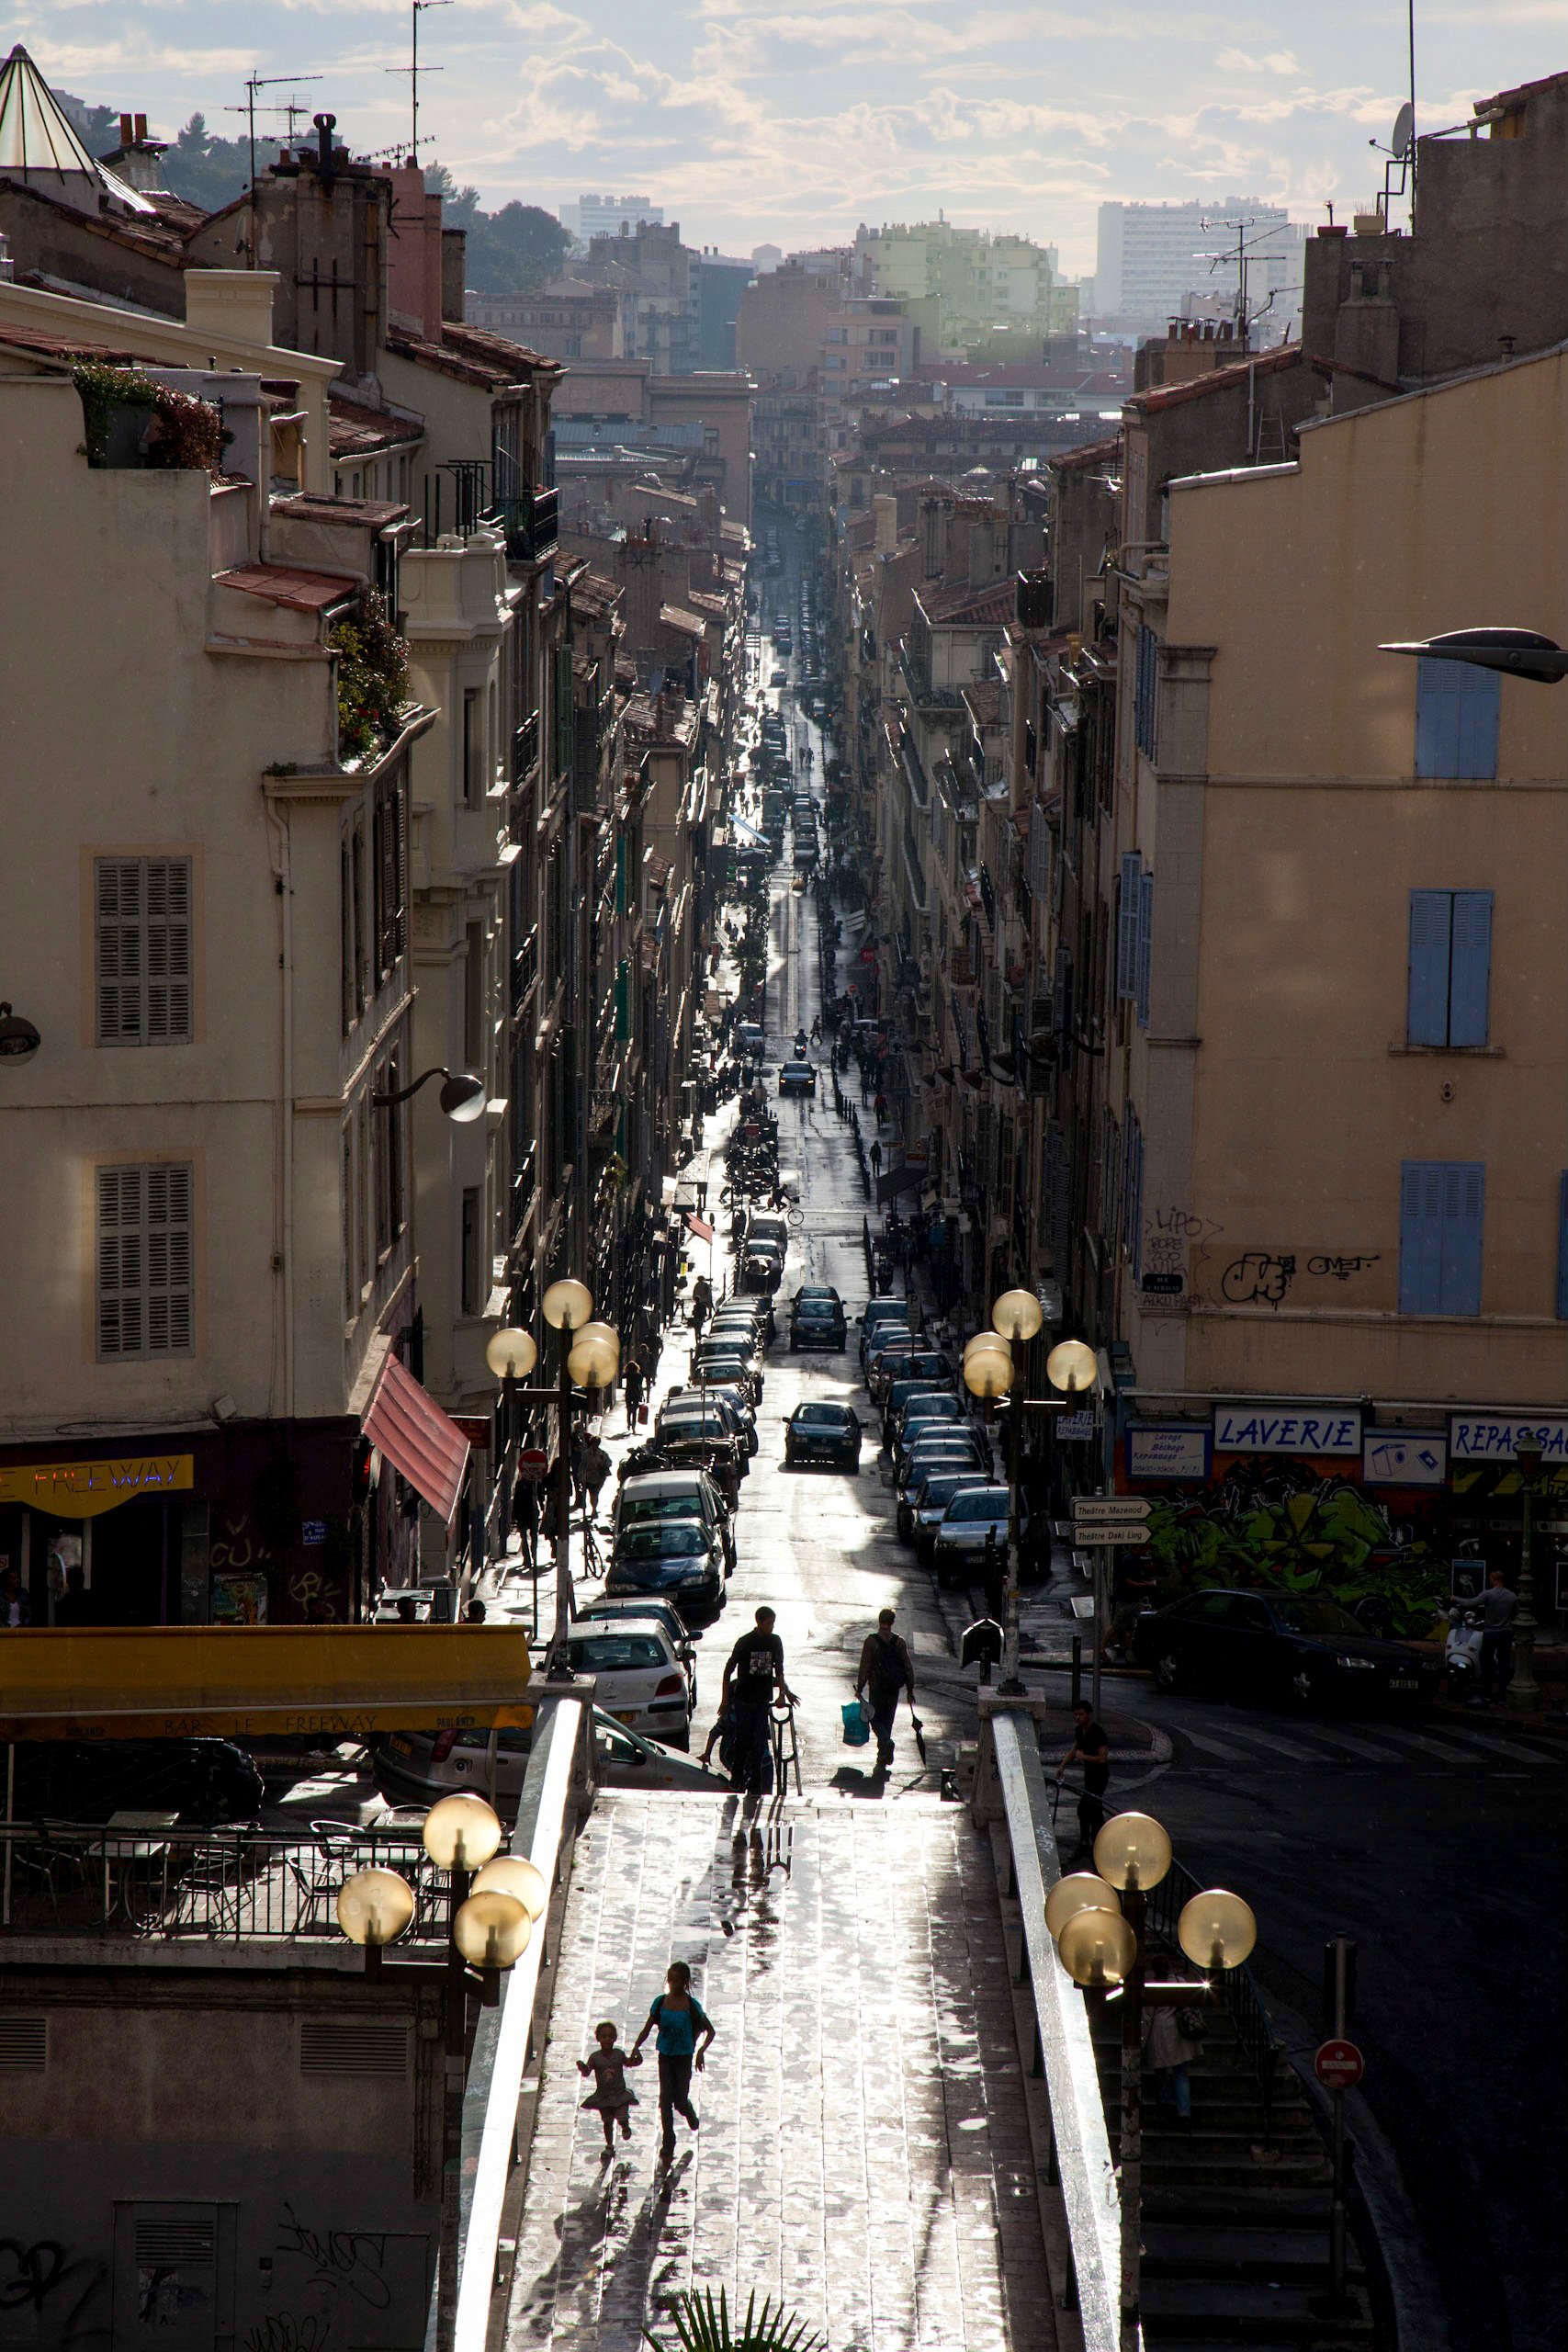  A scene on the streets of the Noailles district of Marseille, France on Sept. 24, 2010. 